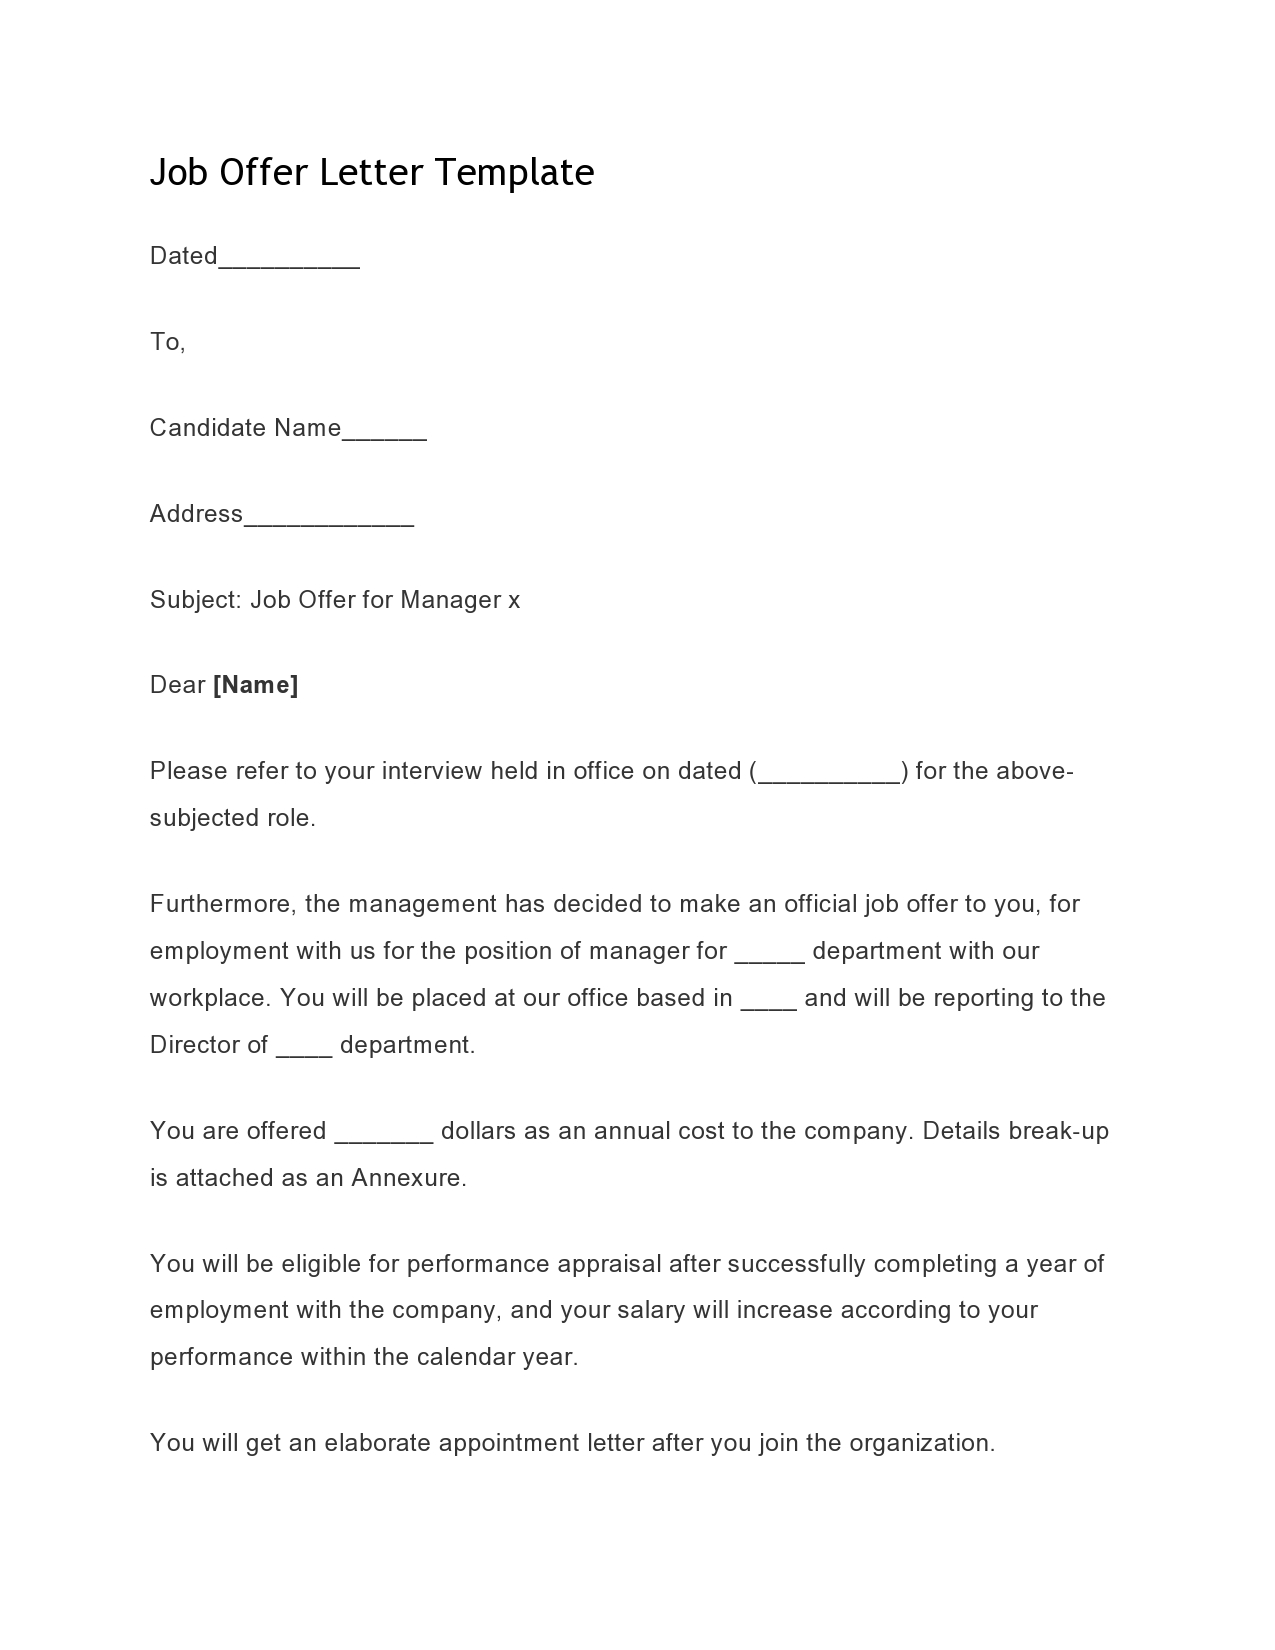 Free employment offer letter template 18